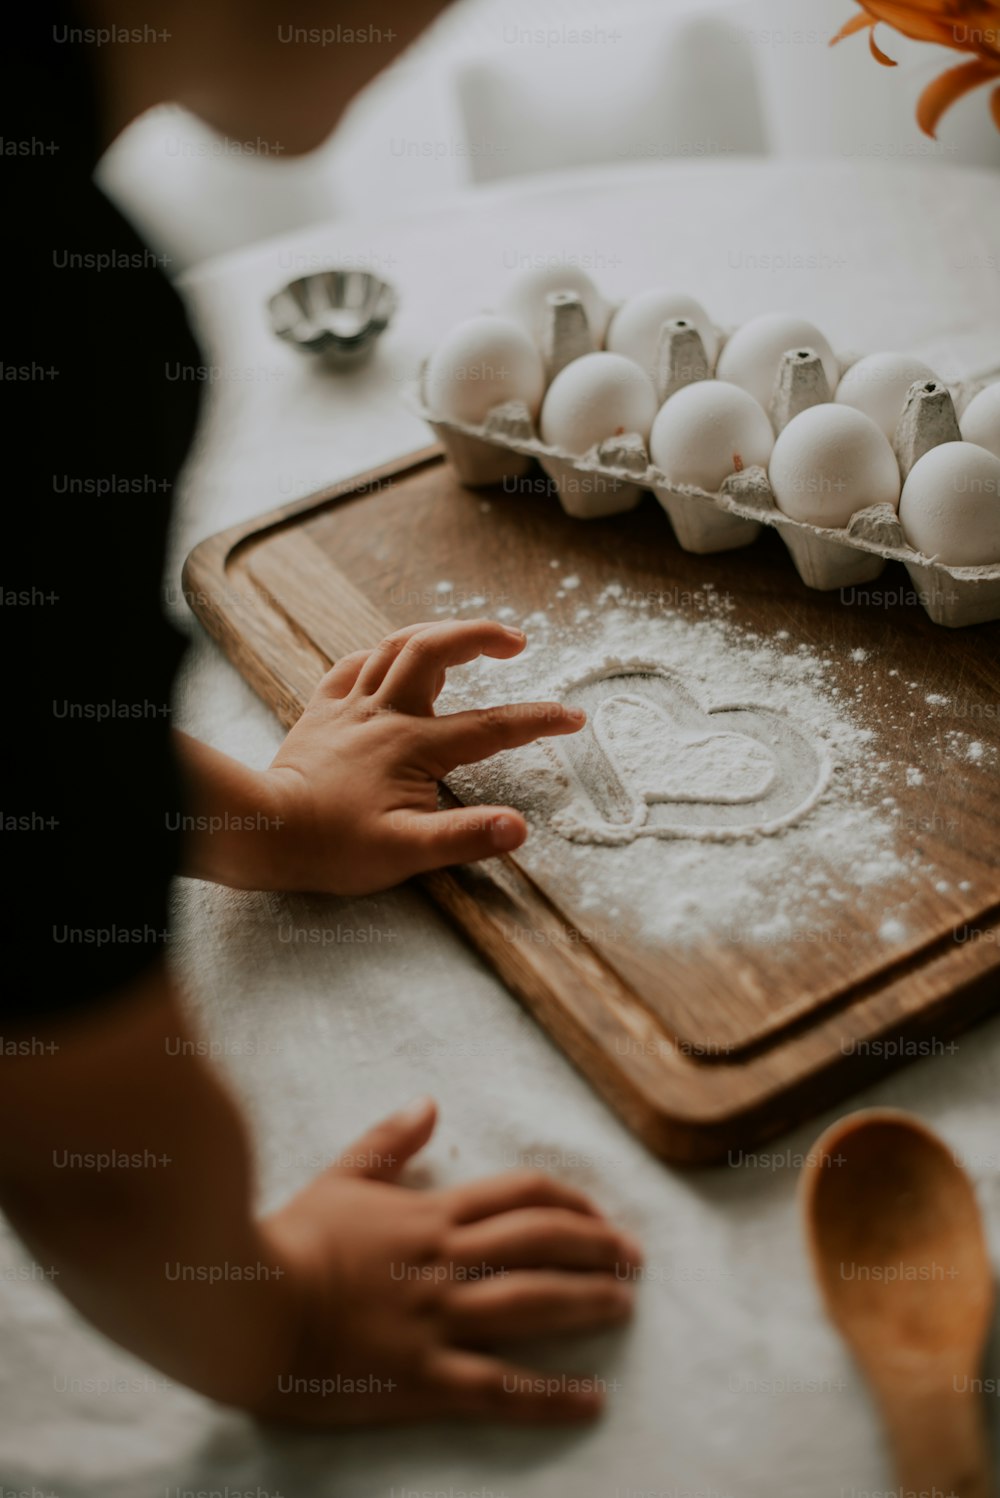 a person standing over a cutting board with eggs on it